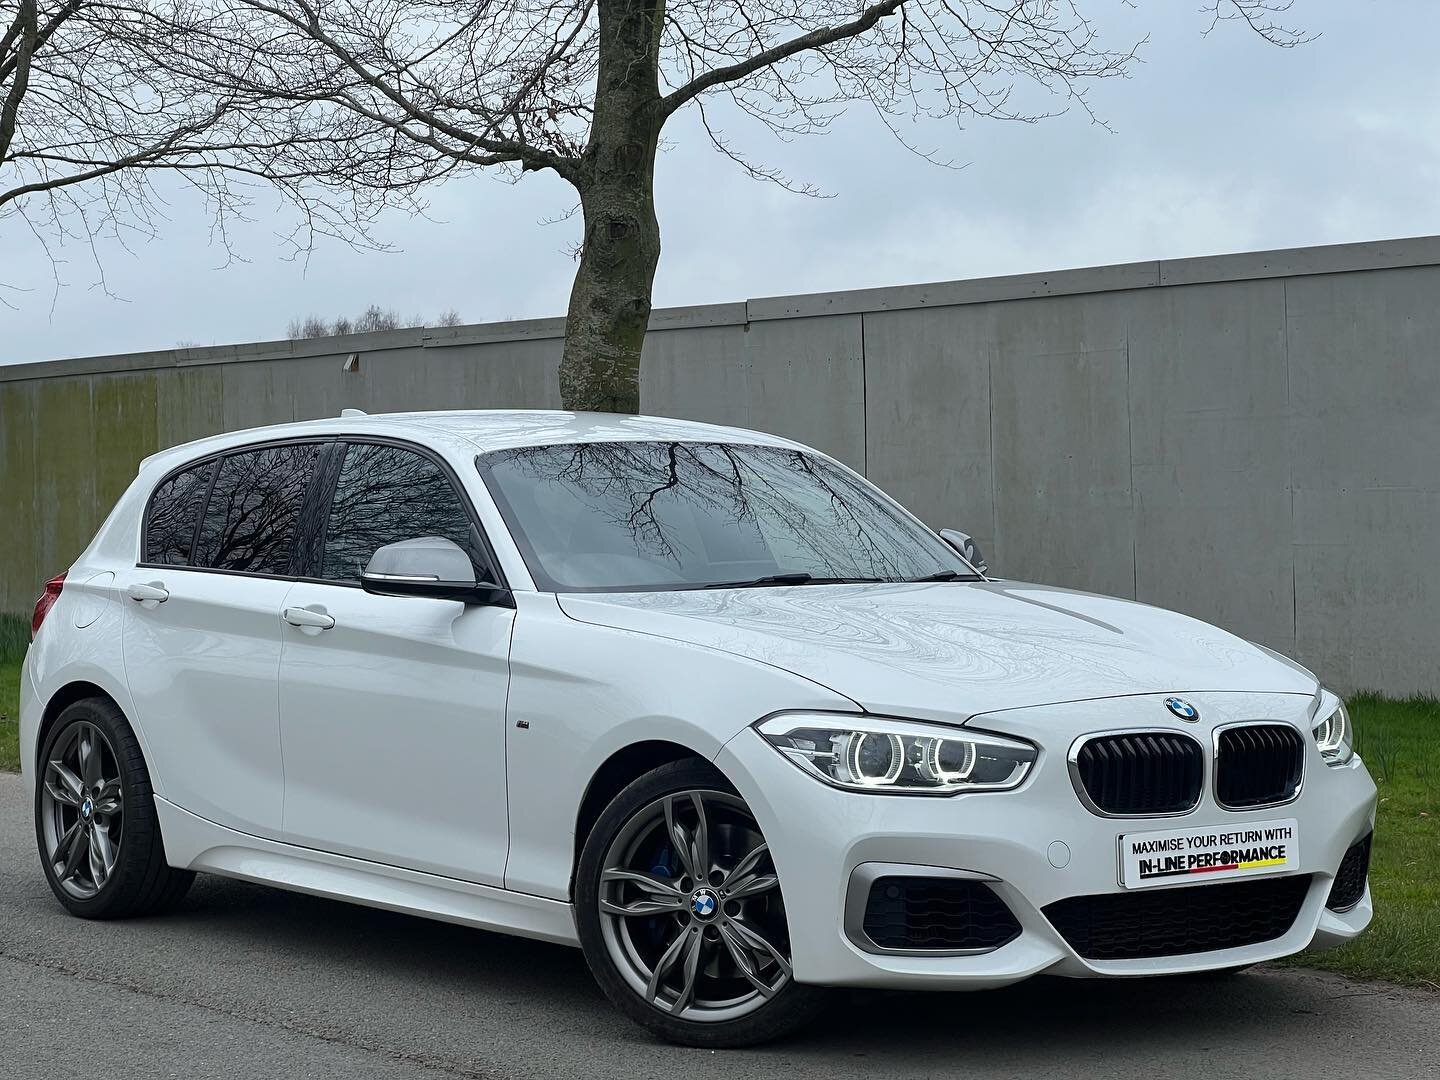 Here At IN-LINE PERFORMANCE We Take Pride And Joy Into Supplying You With Great Quality Of The Best Of Performance Engineering. We Are Proud To Present To You This 1 Owner From New 2016 BMW M135I Finished In A Desirable Alpine White With Black Dokota